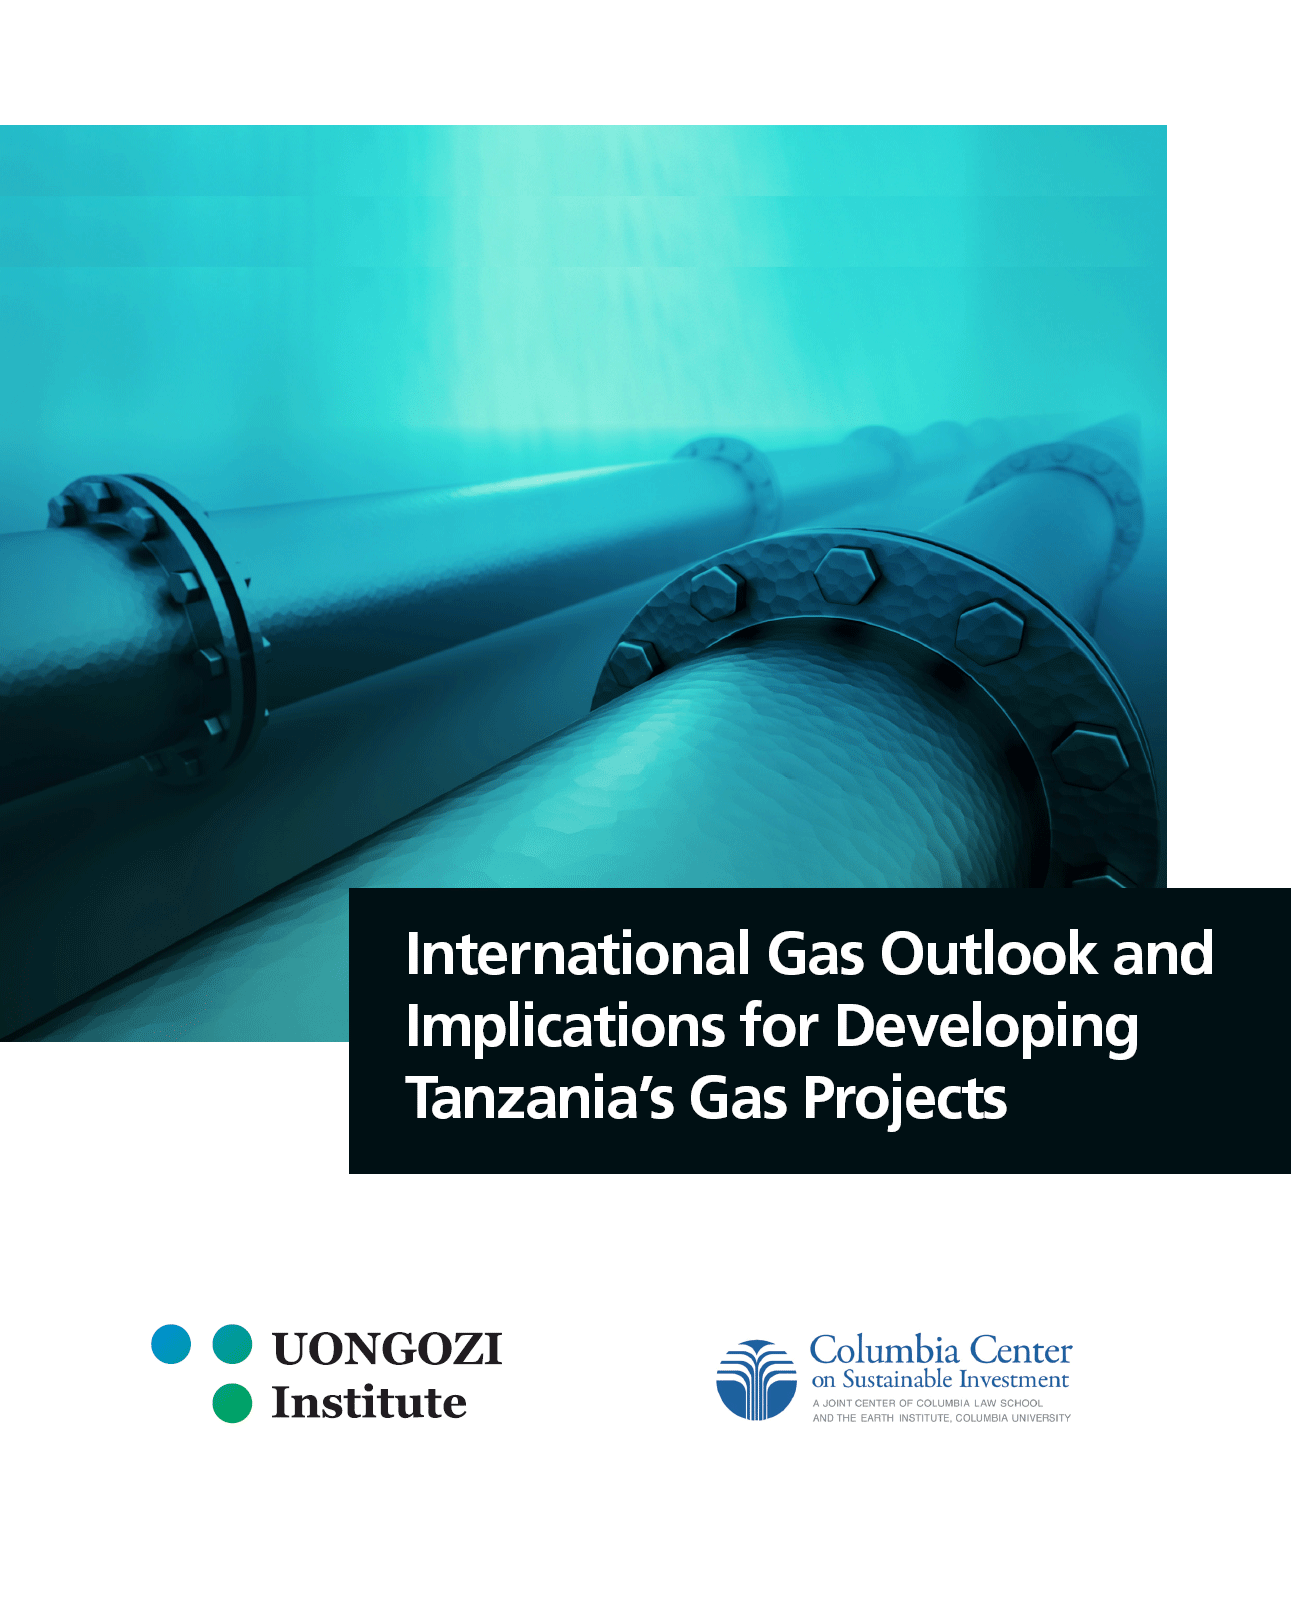 International Gas Outlook and Implications for Developing Tanzania’s Gas Projects